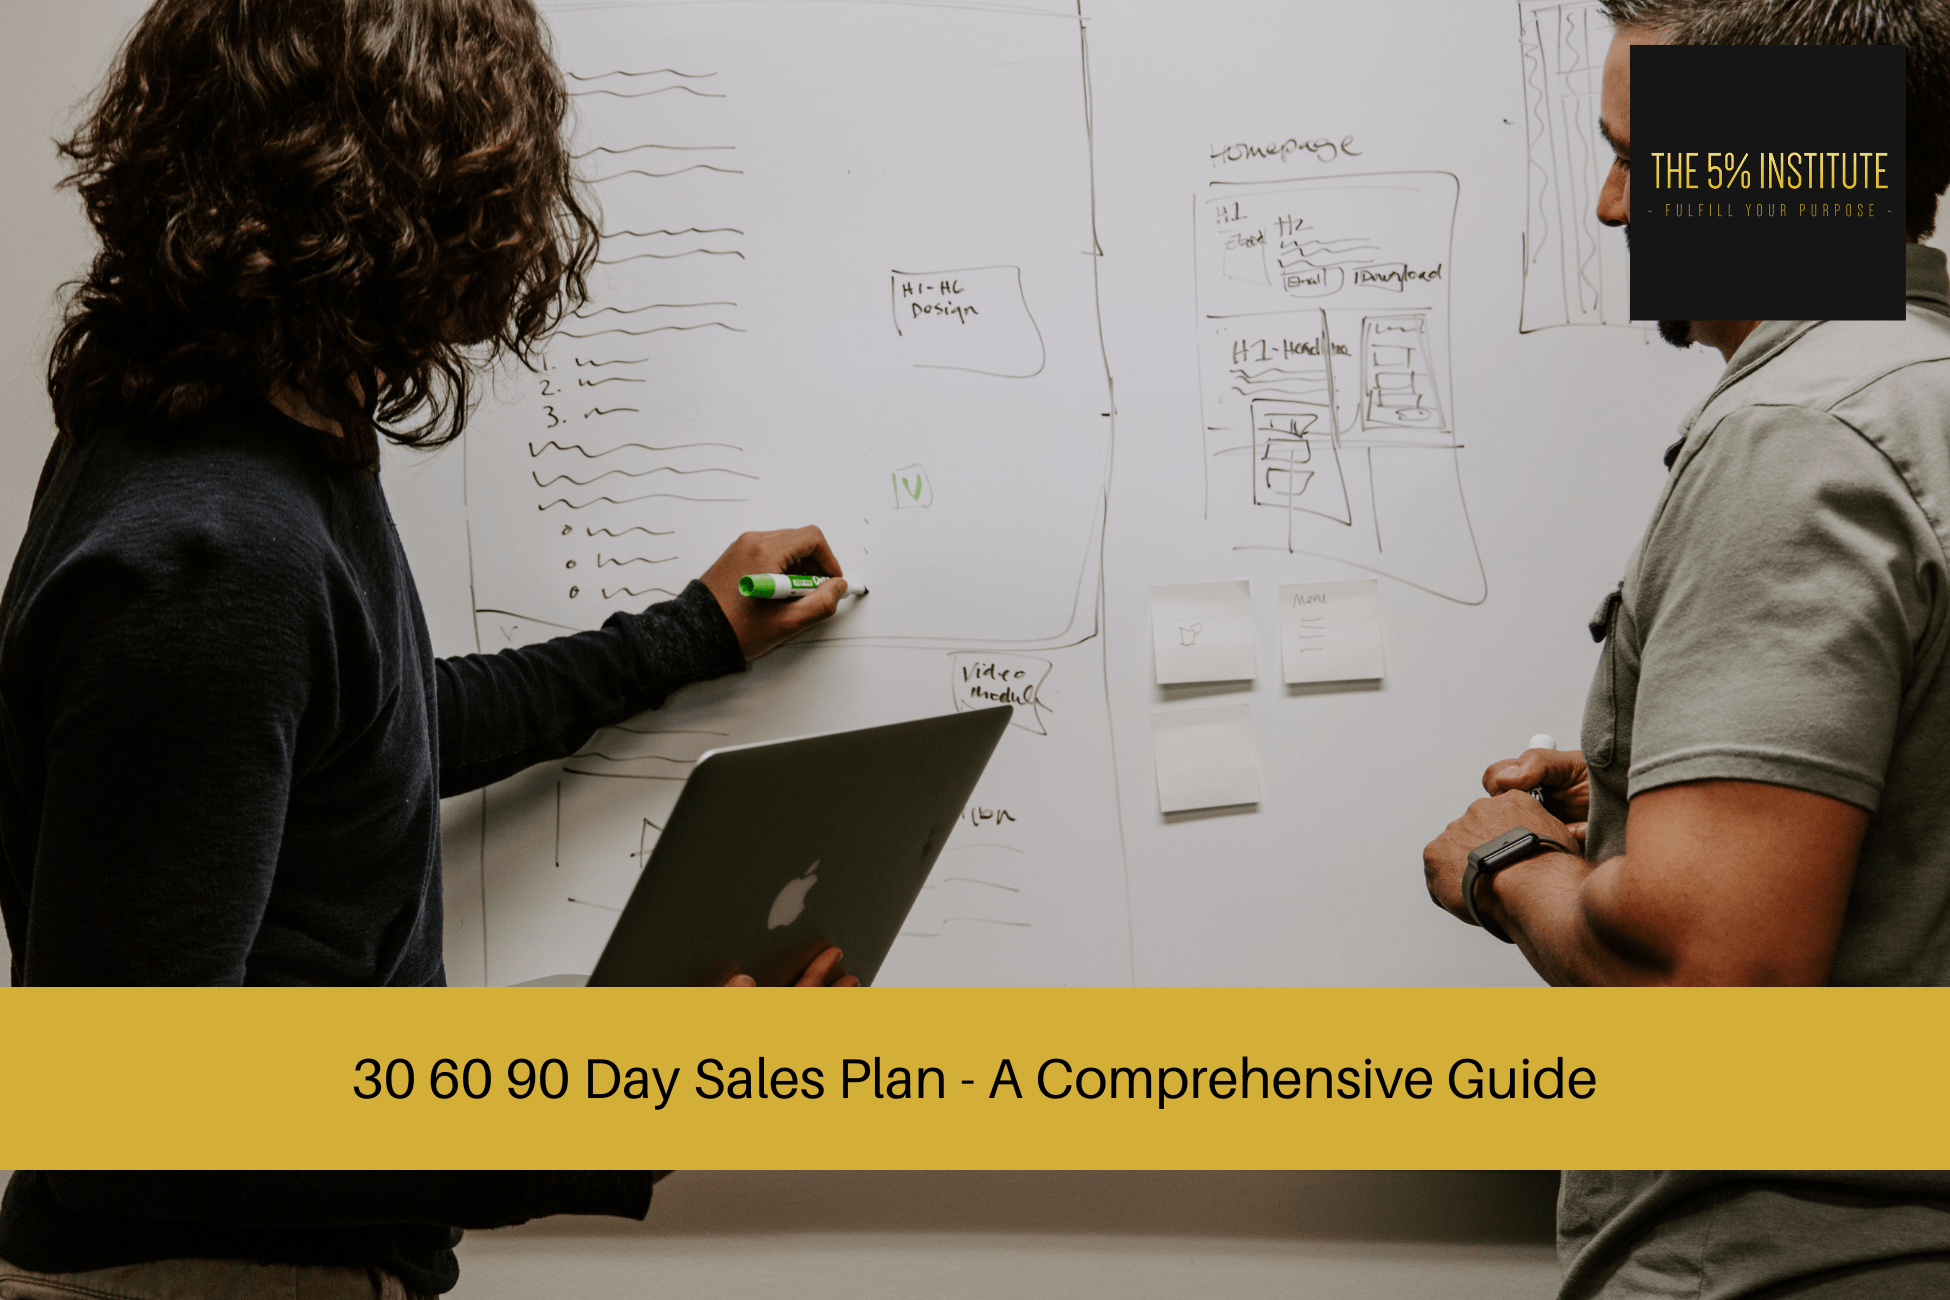 30 60 90 Day Sales Plan - A Comprehensive Guide